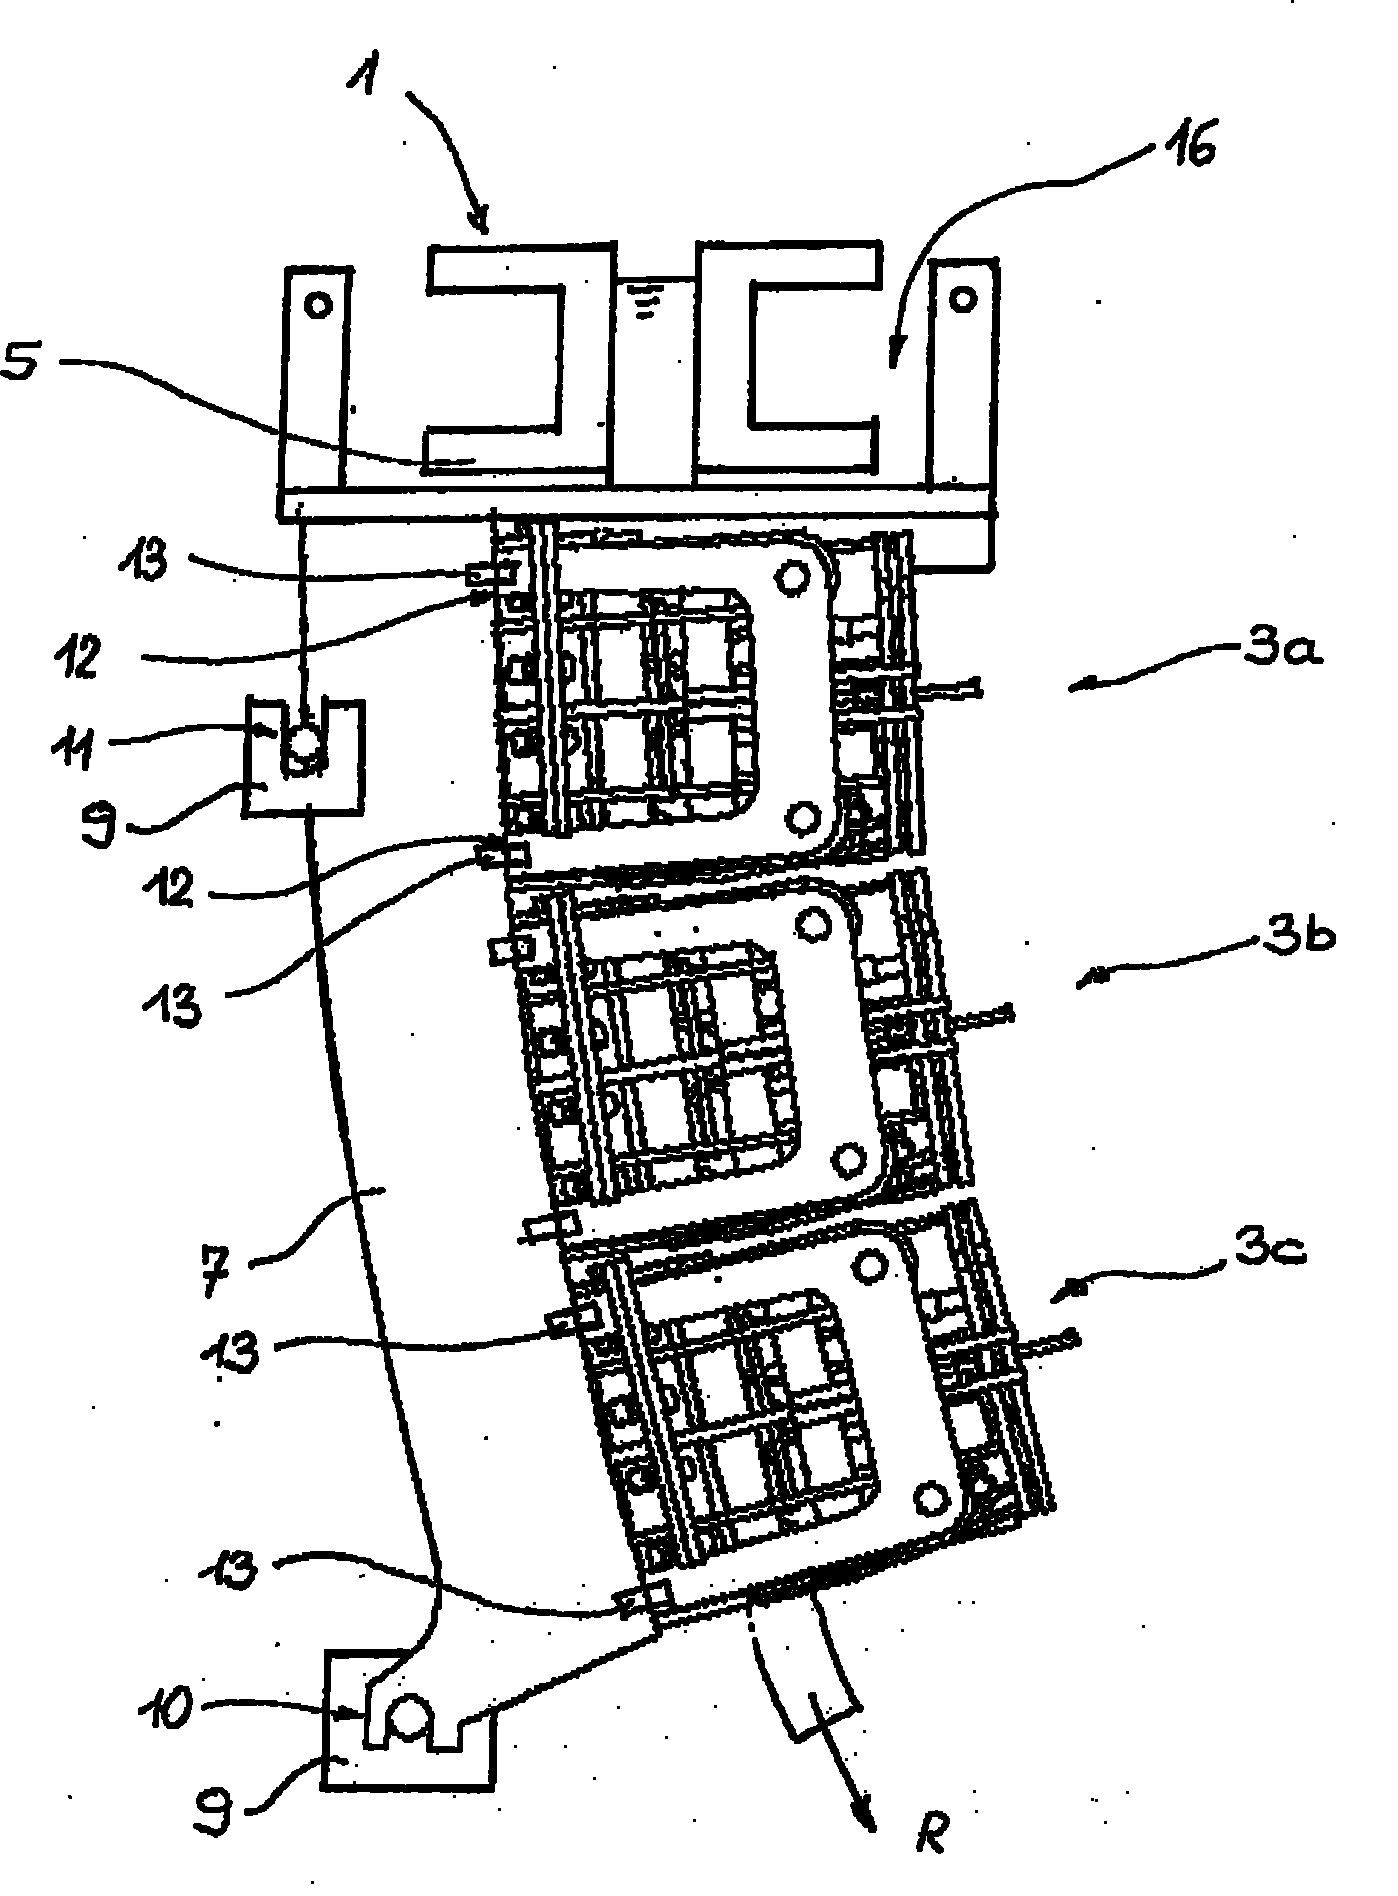 Continuous casting system for casting a metal strand having a billet or bloom cross-section